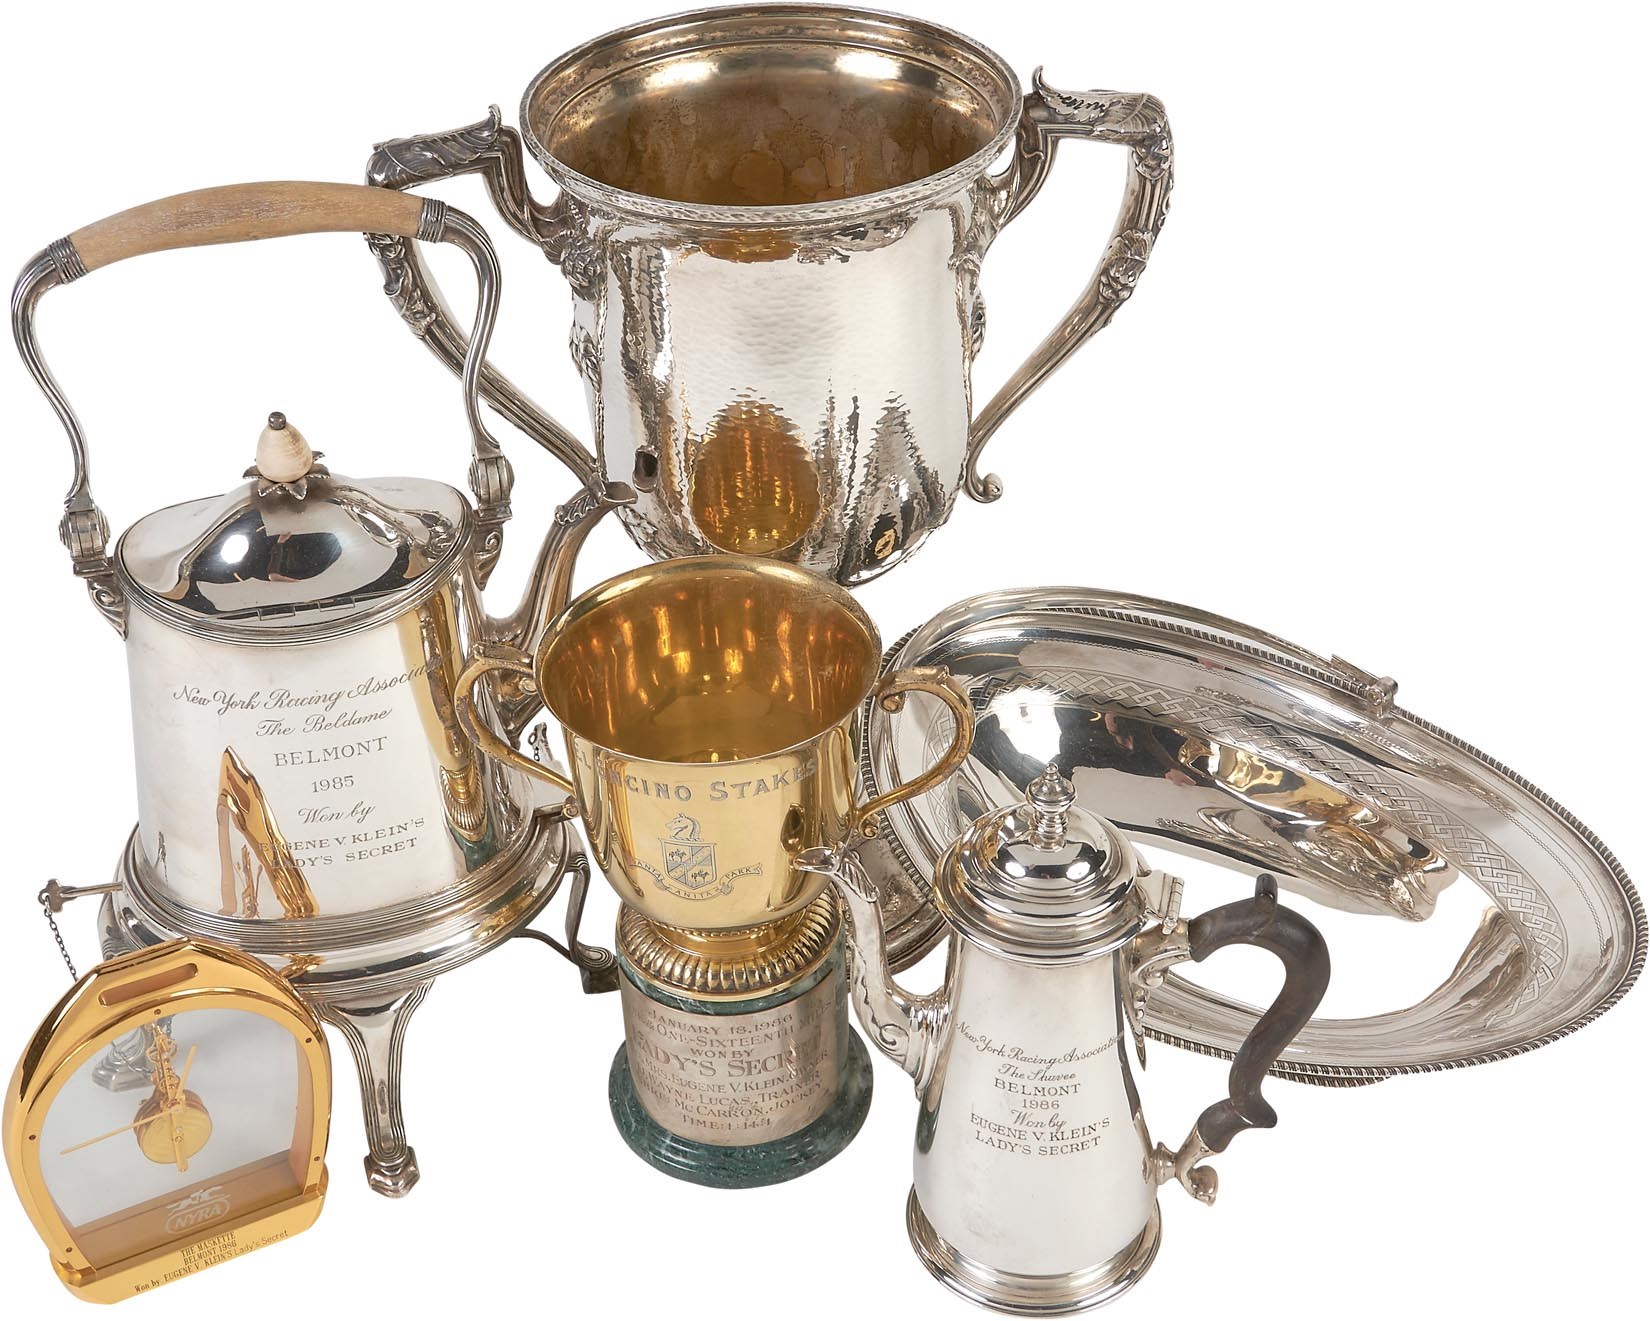 Horse Racing - Collection of Race Trophies from 1986 Horse of the Year, Lady's Secret, awarded to her Owner, Eugene Klein (7)